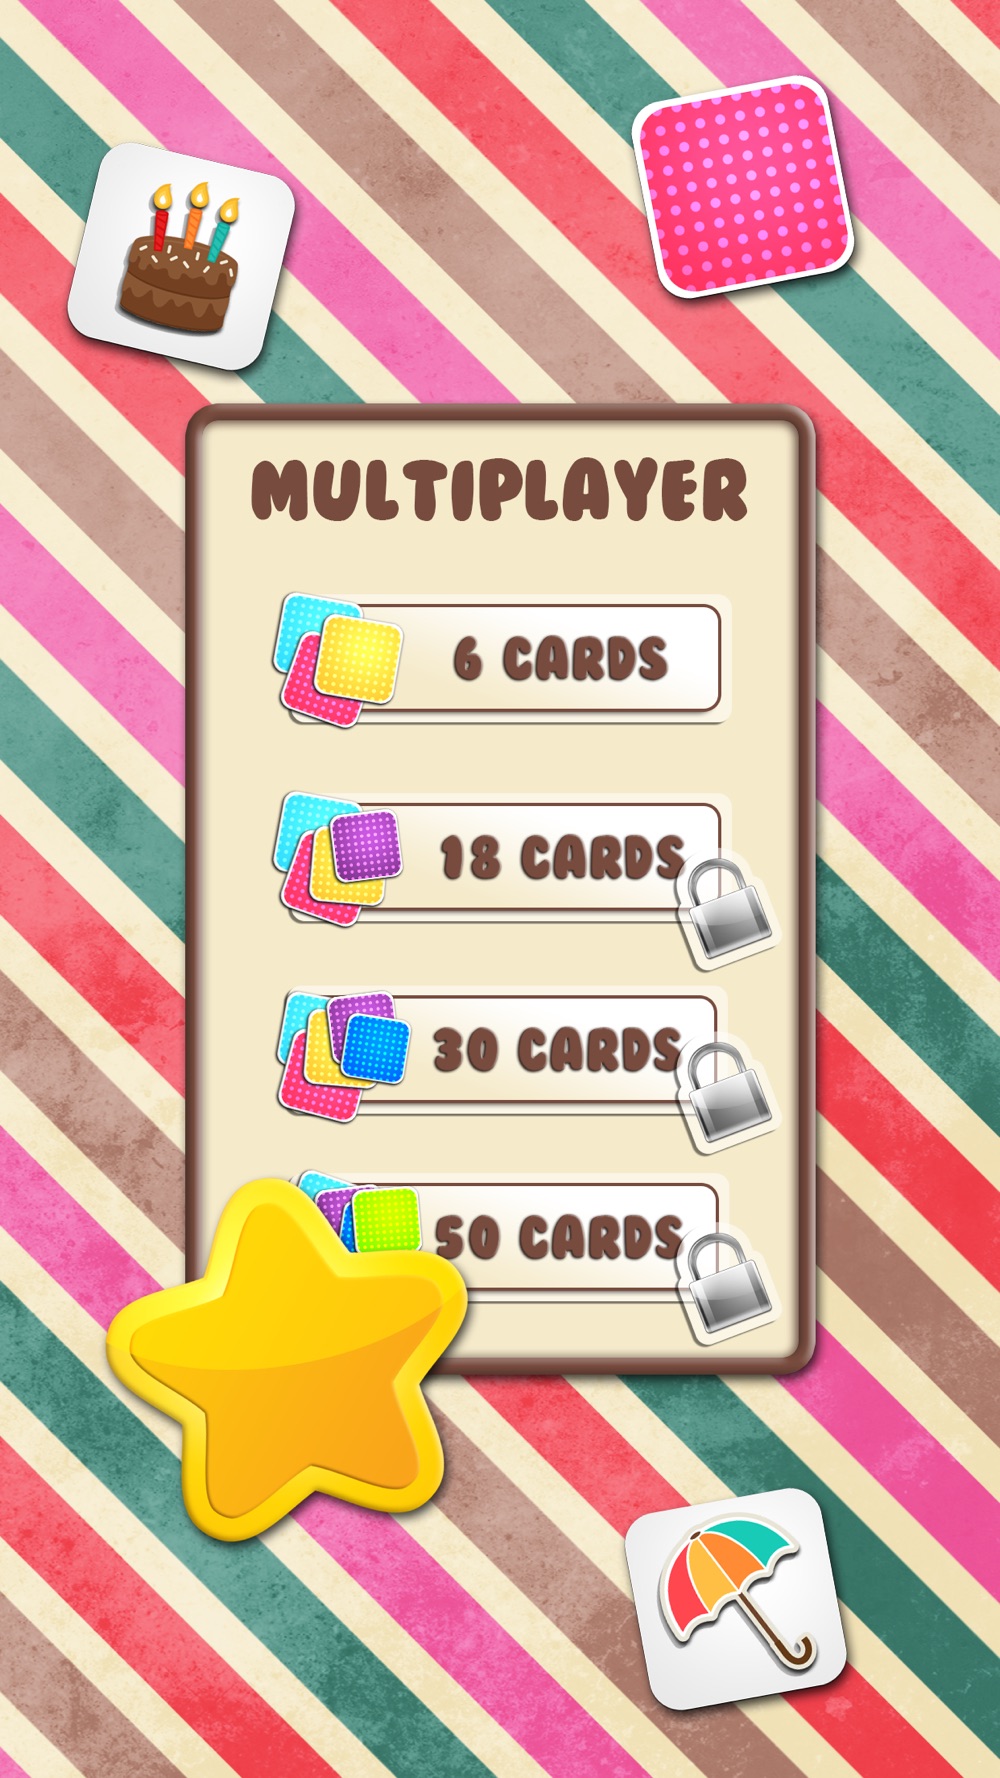 Memo Boost & Card Match – Memory Improving Game for All Age.s with Cute Pic.s and Multi Player Mode